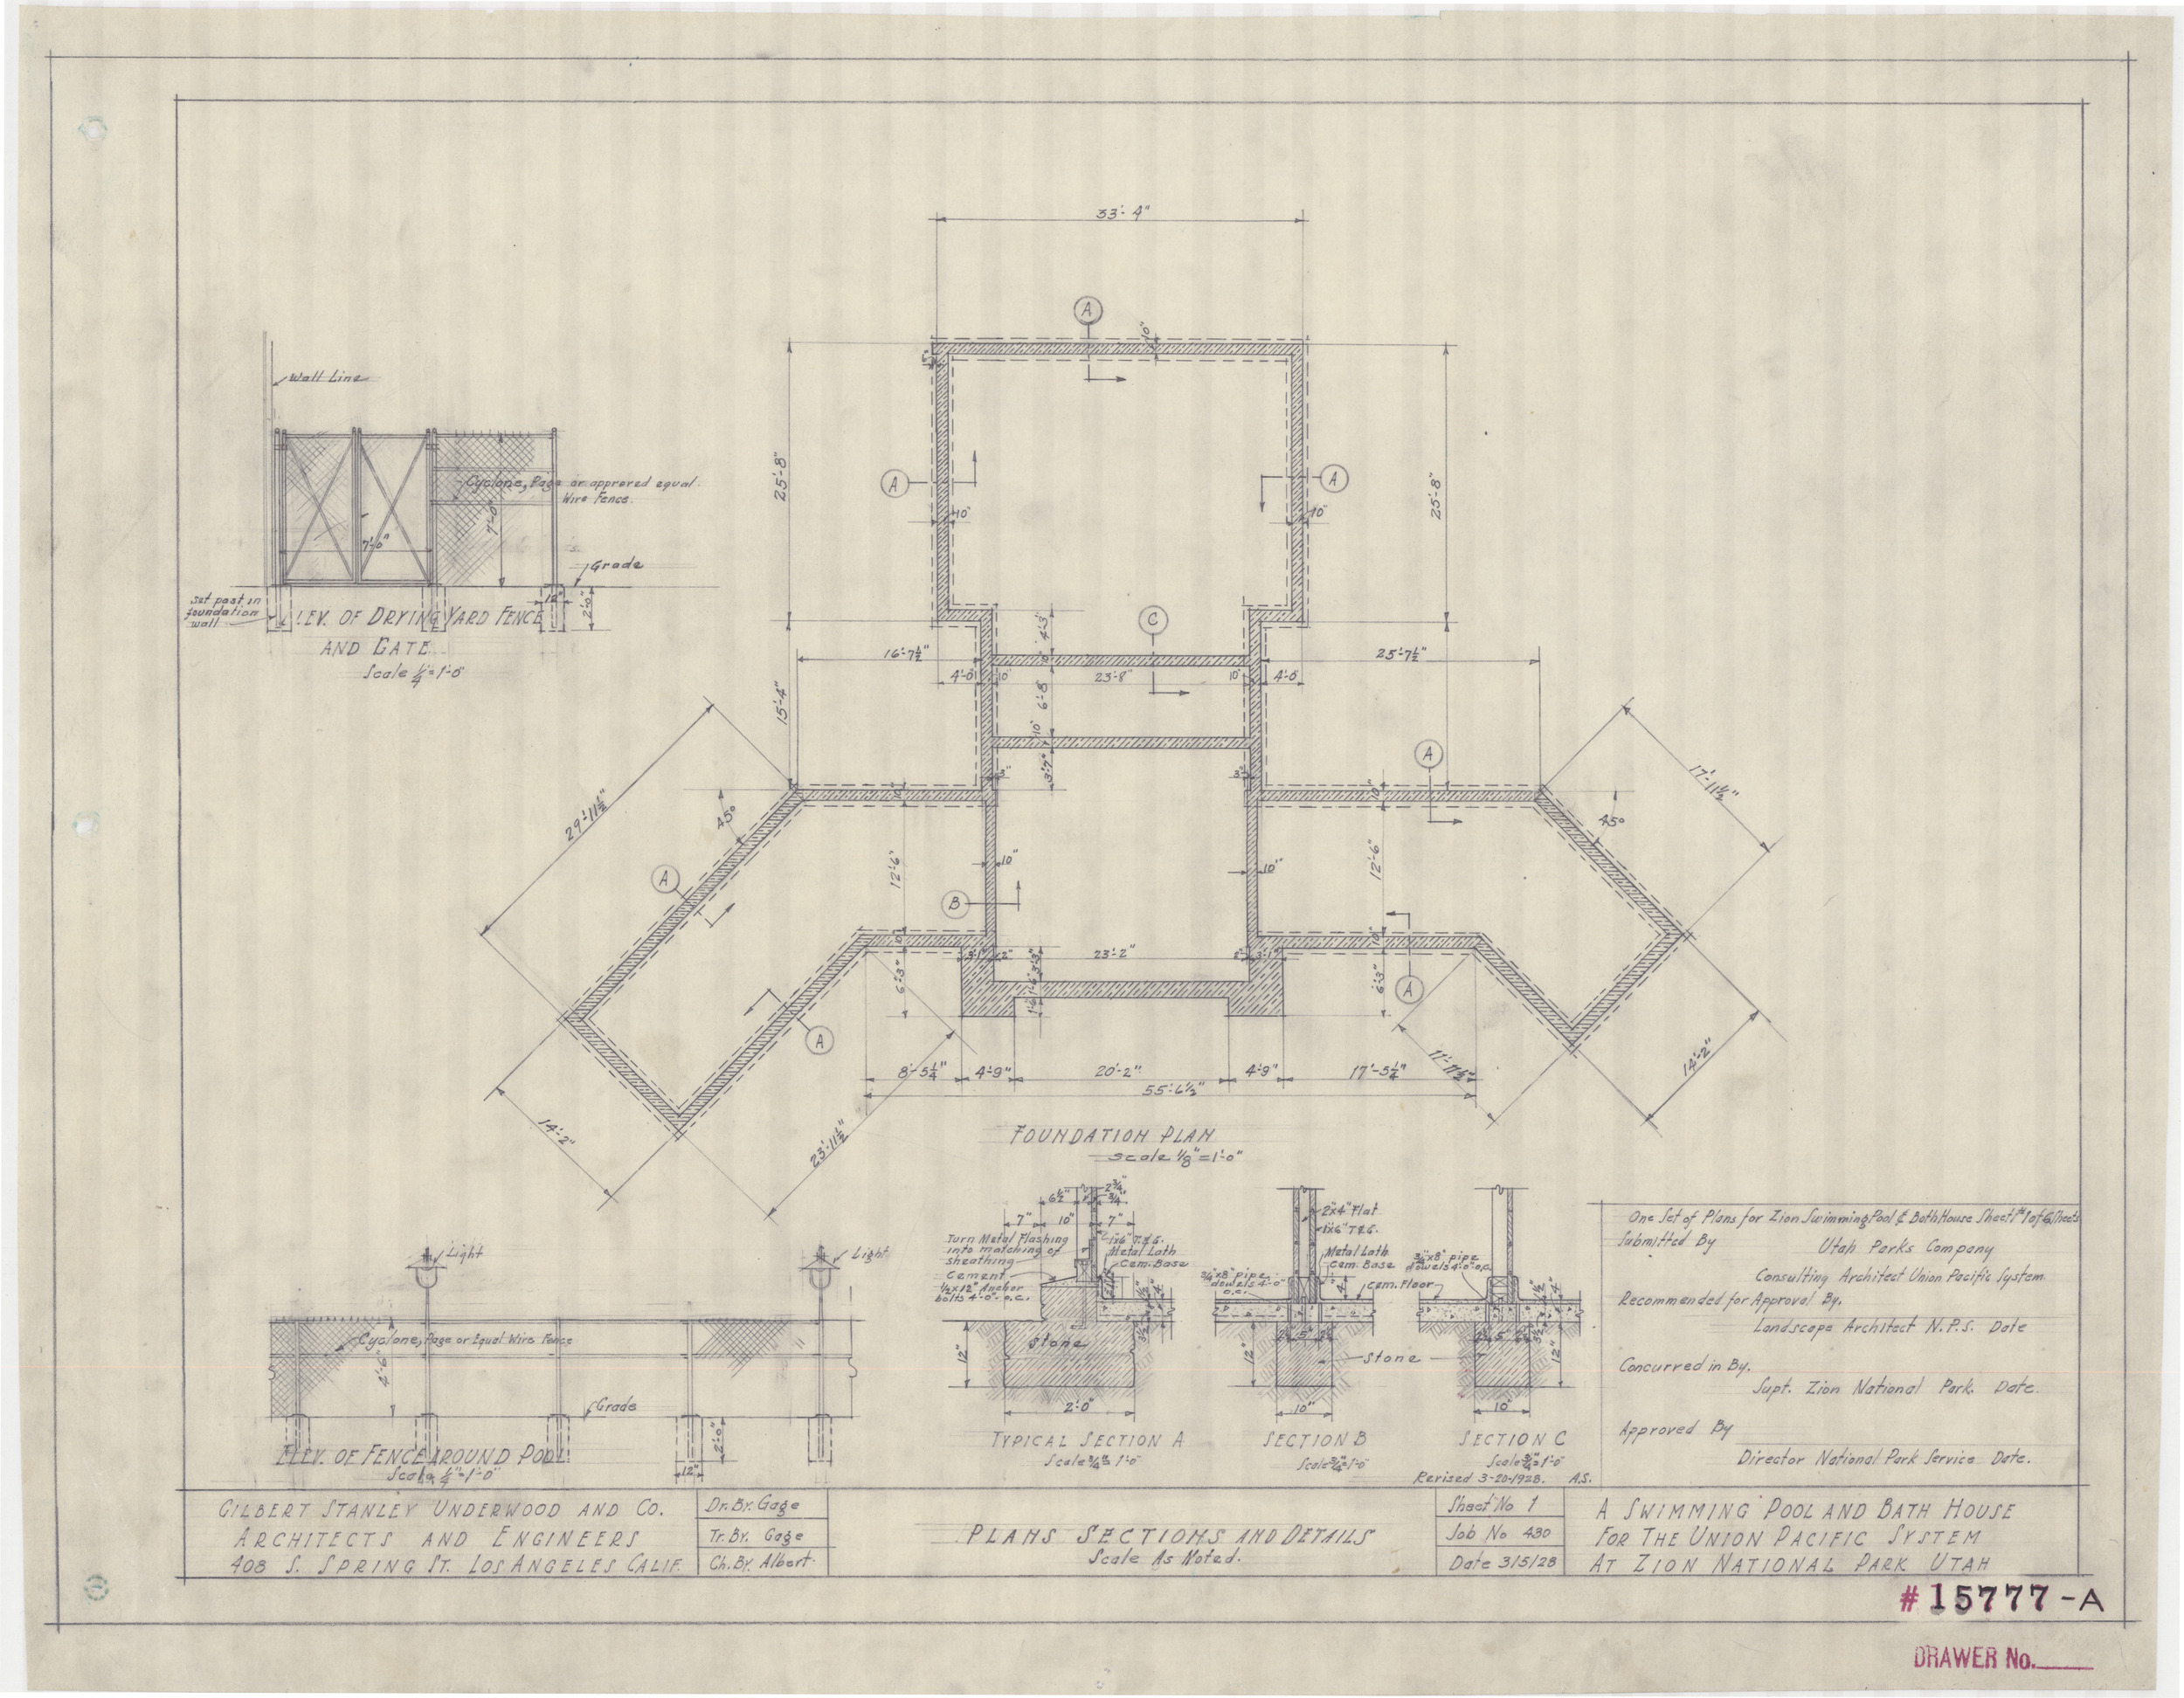 Architectural drawing of swimming pool & bath house at Zion National Park, Utah, plans, sections and details, March 5, 1928, sheet no. 1, plans, sections and details